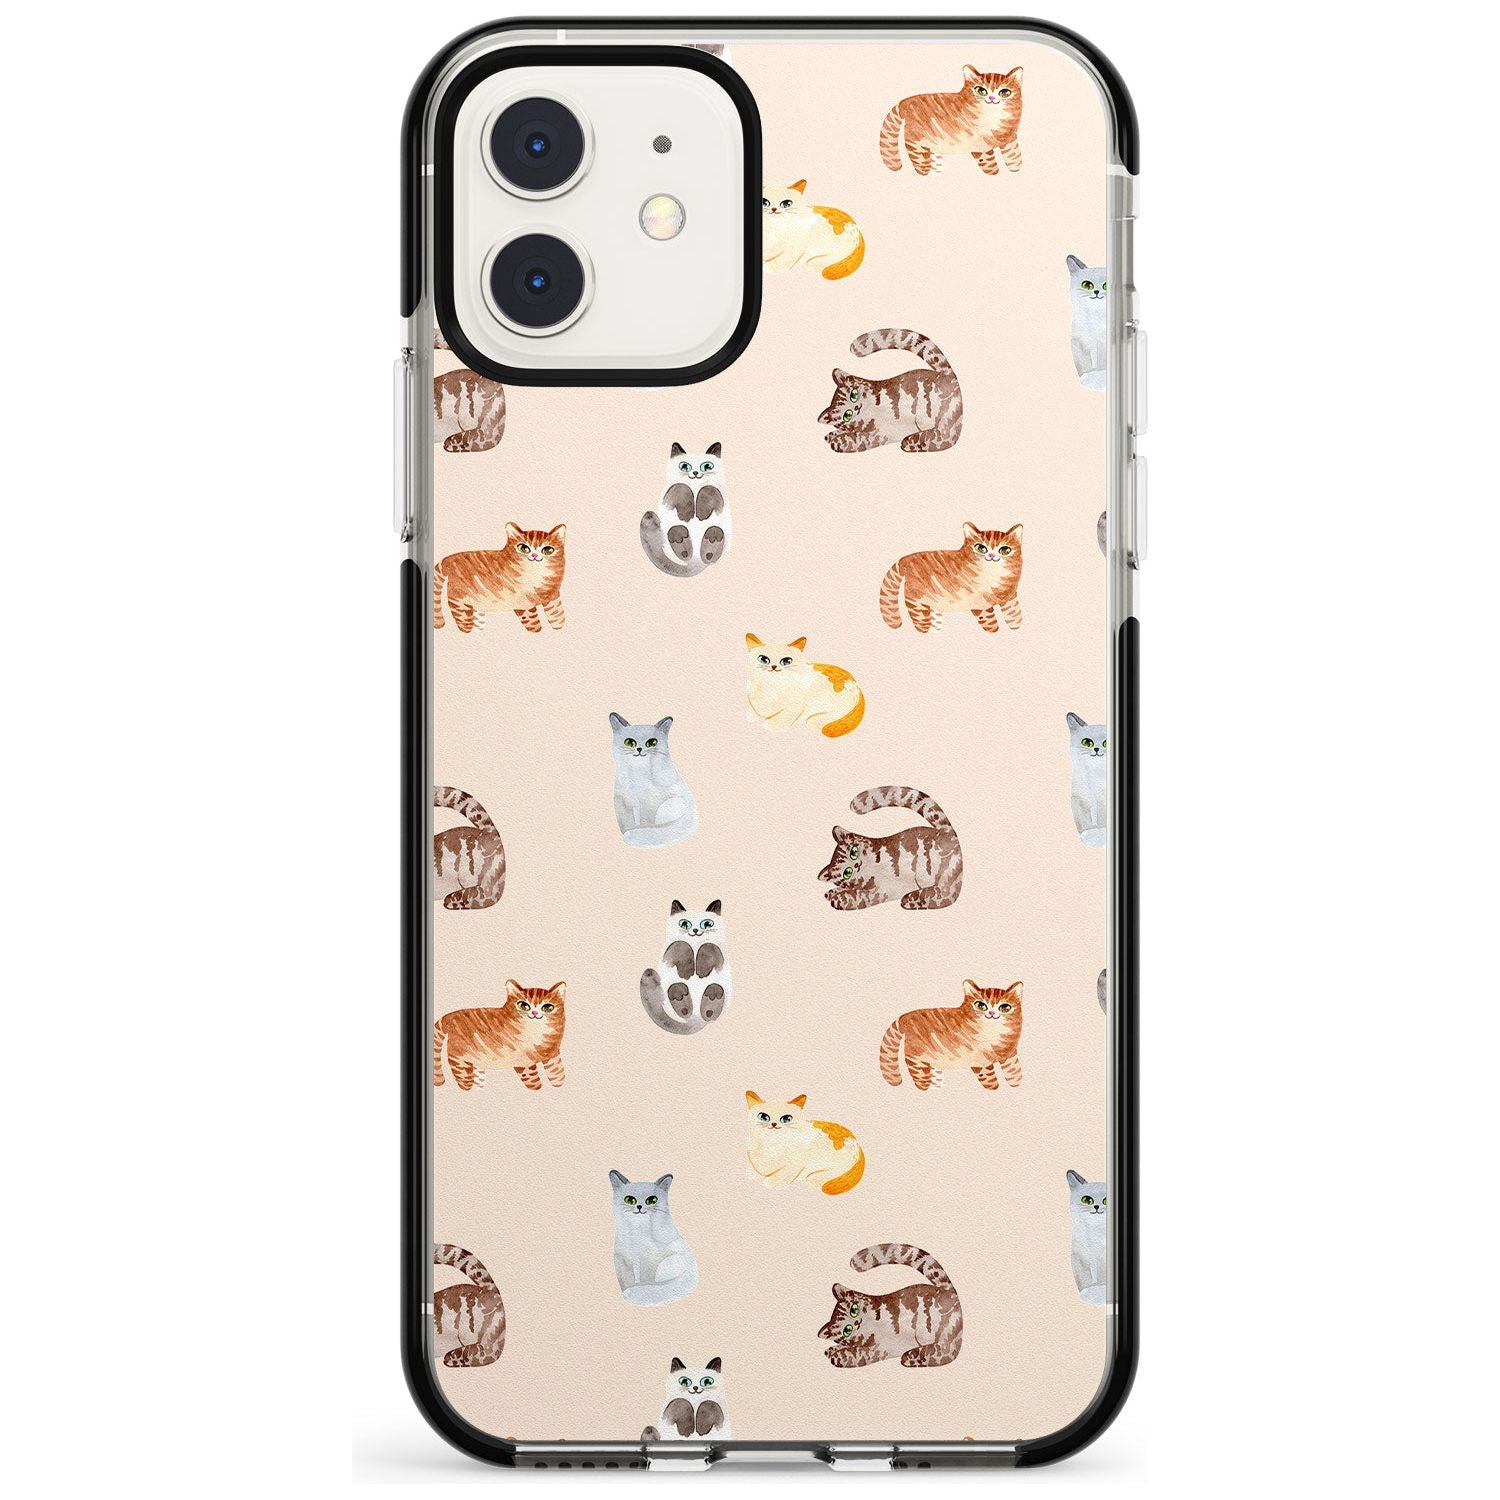 Cute Cat Pattern Pink Fade Impact Phone Case for iPhone 11 Pro Max